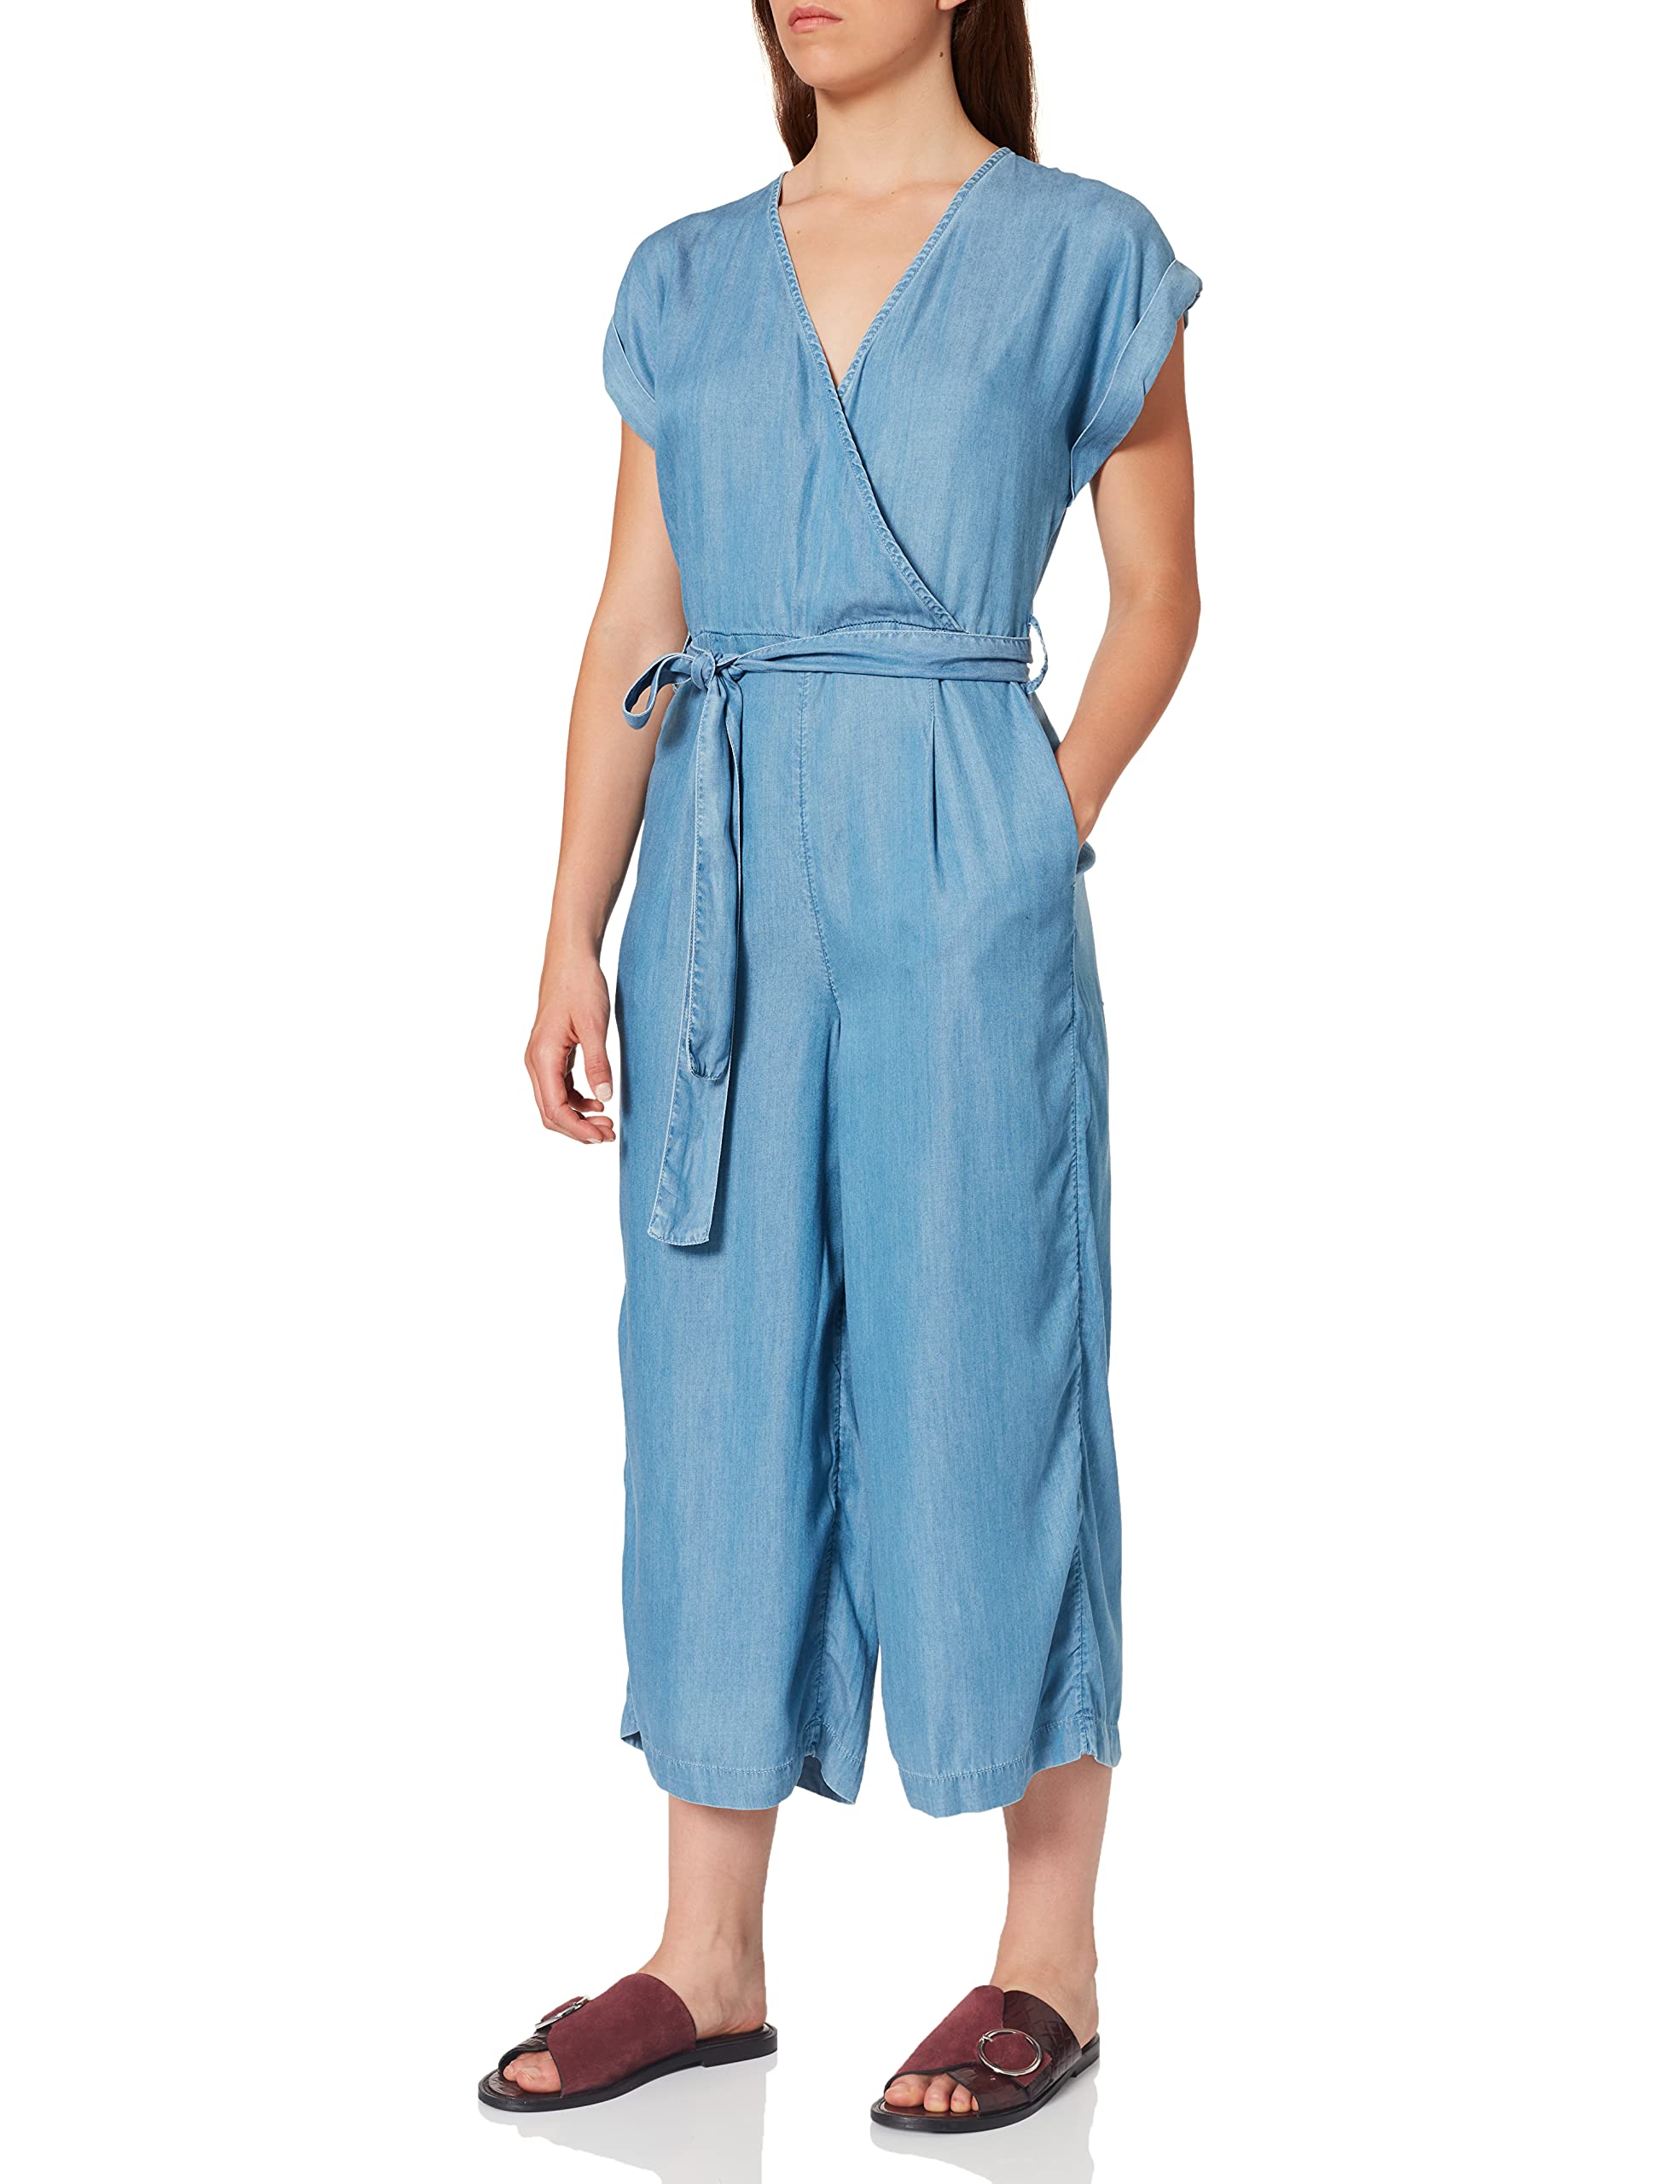 find. W17150l Jumpsuits, Chambray, 32